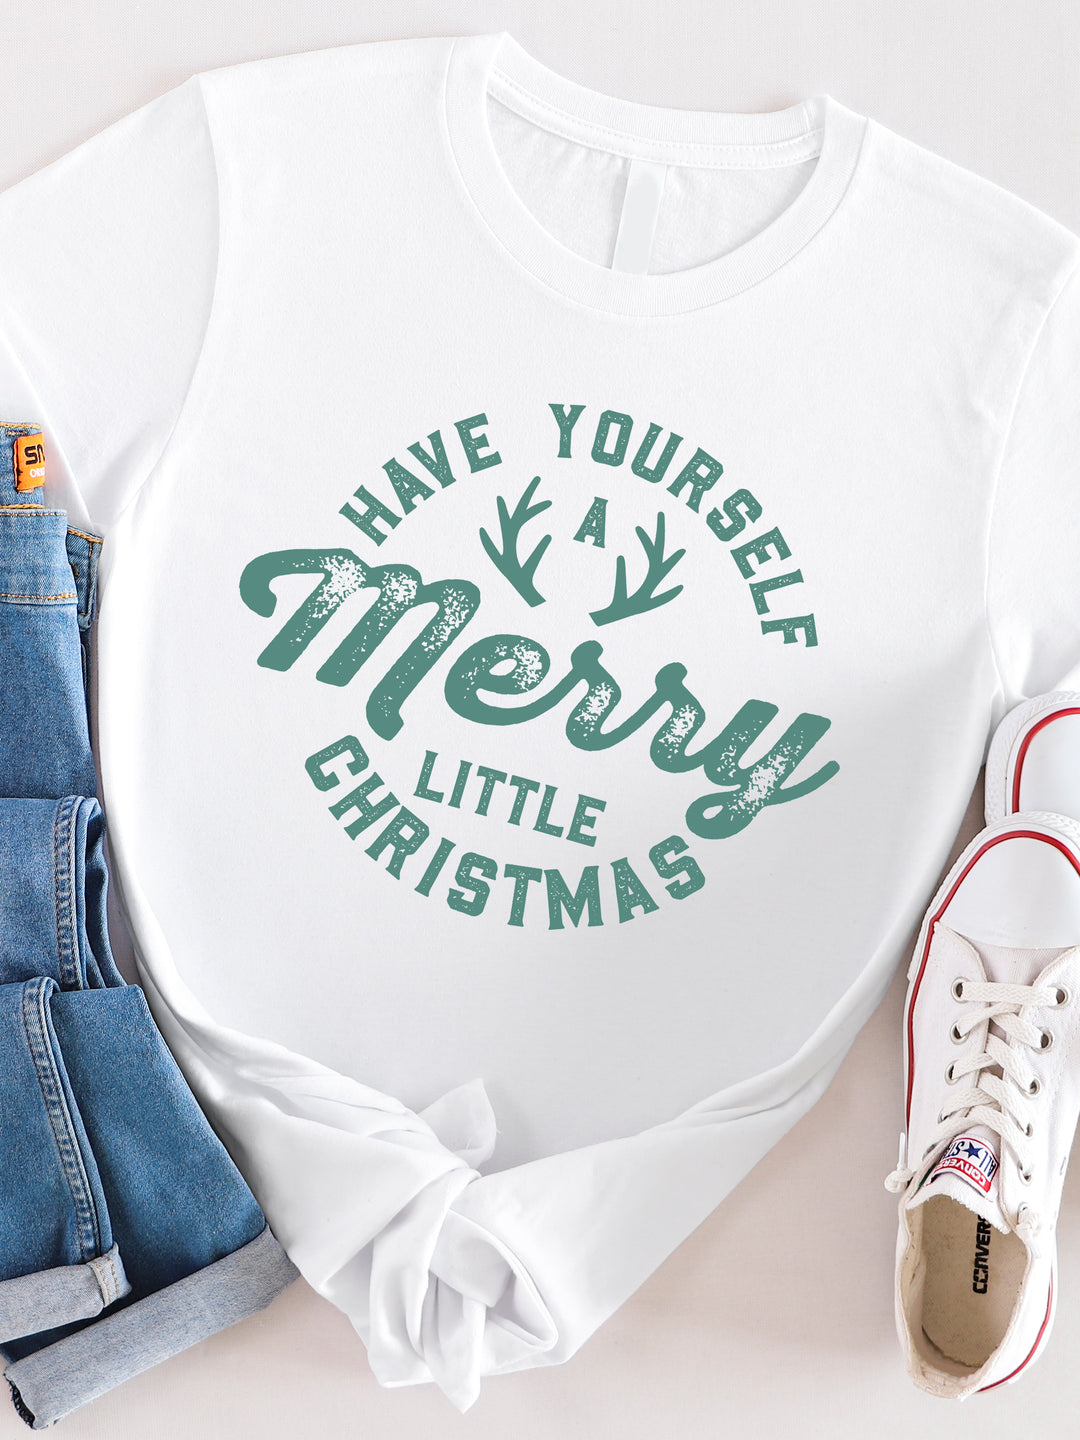 Have A Merry Christmas Graphic Tee